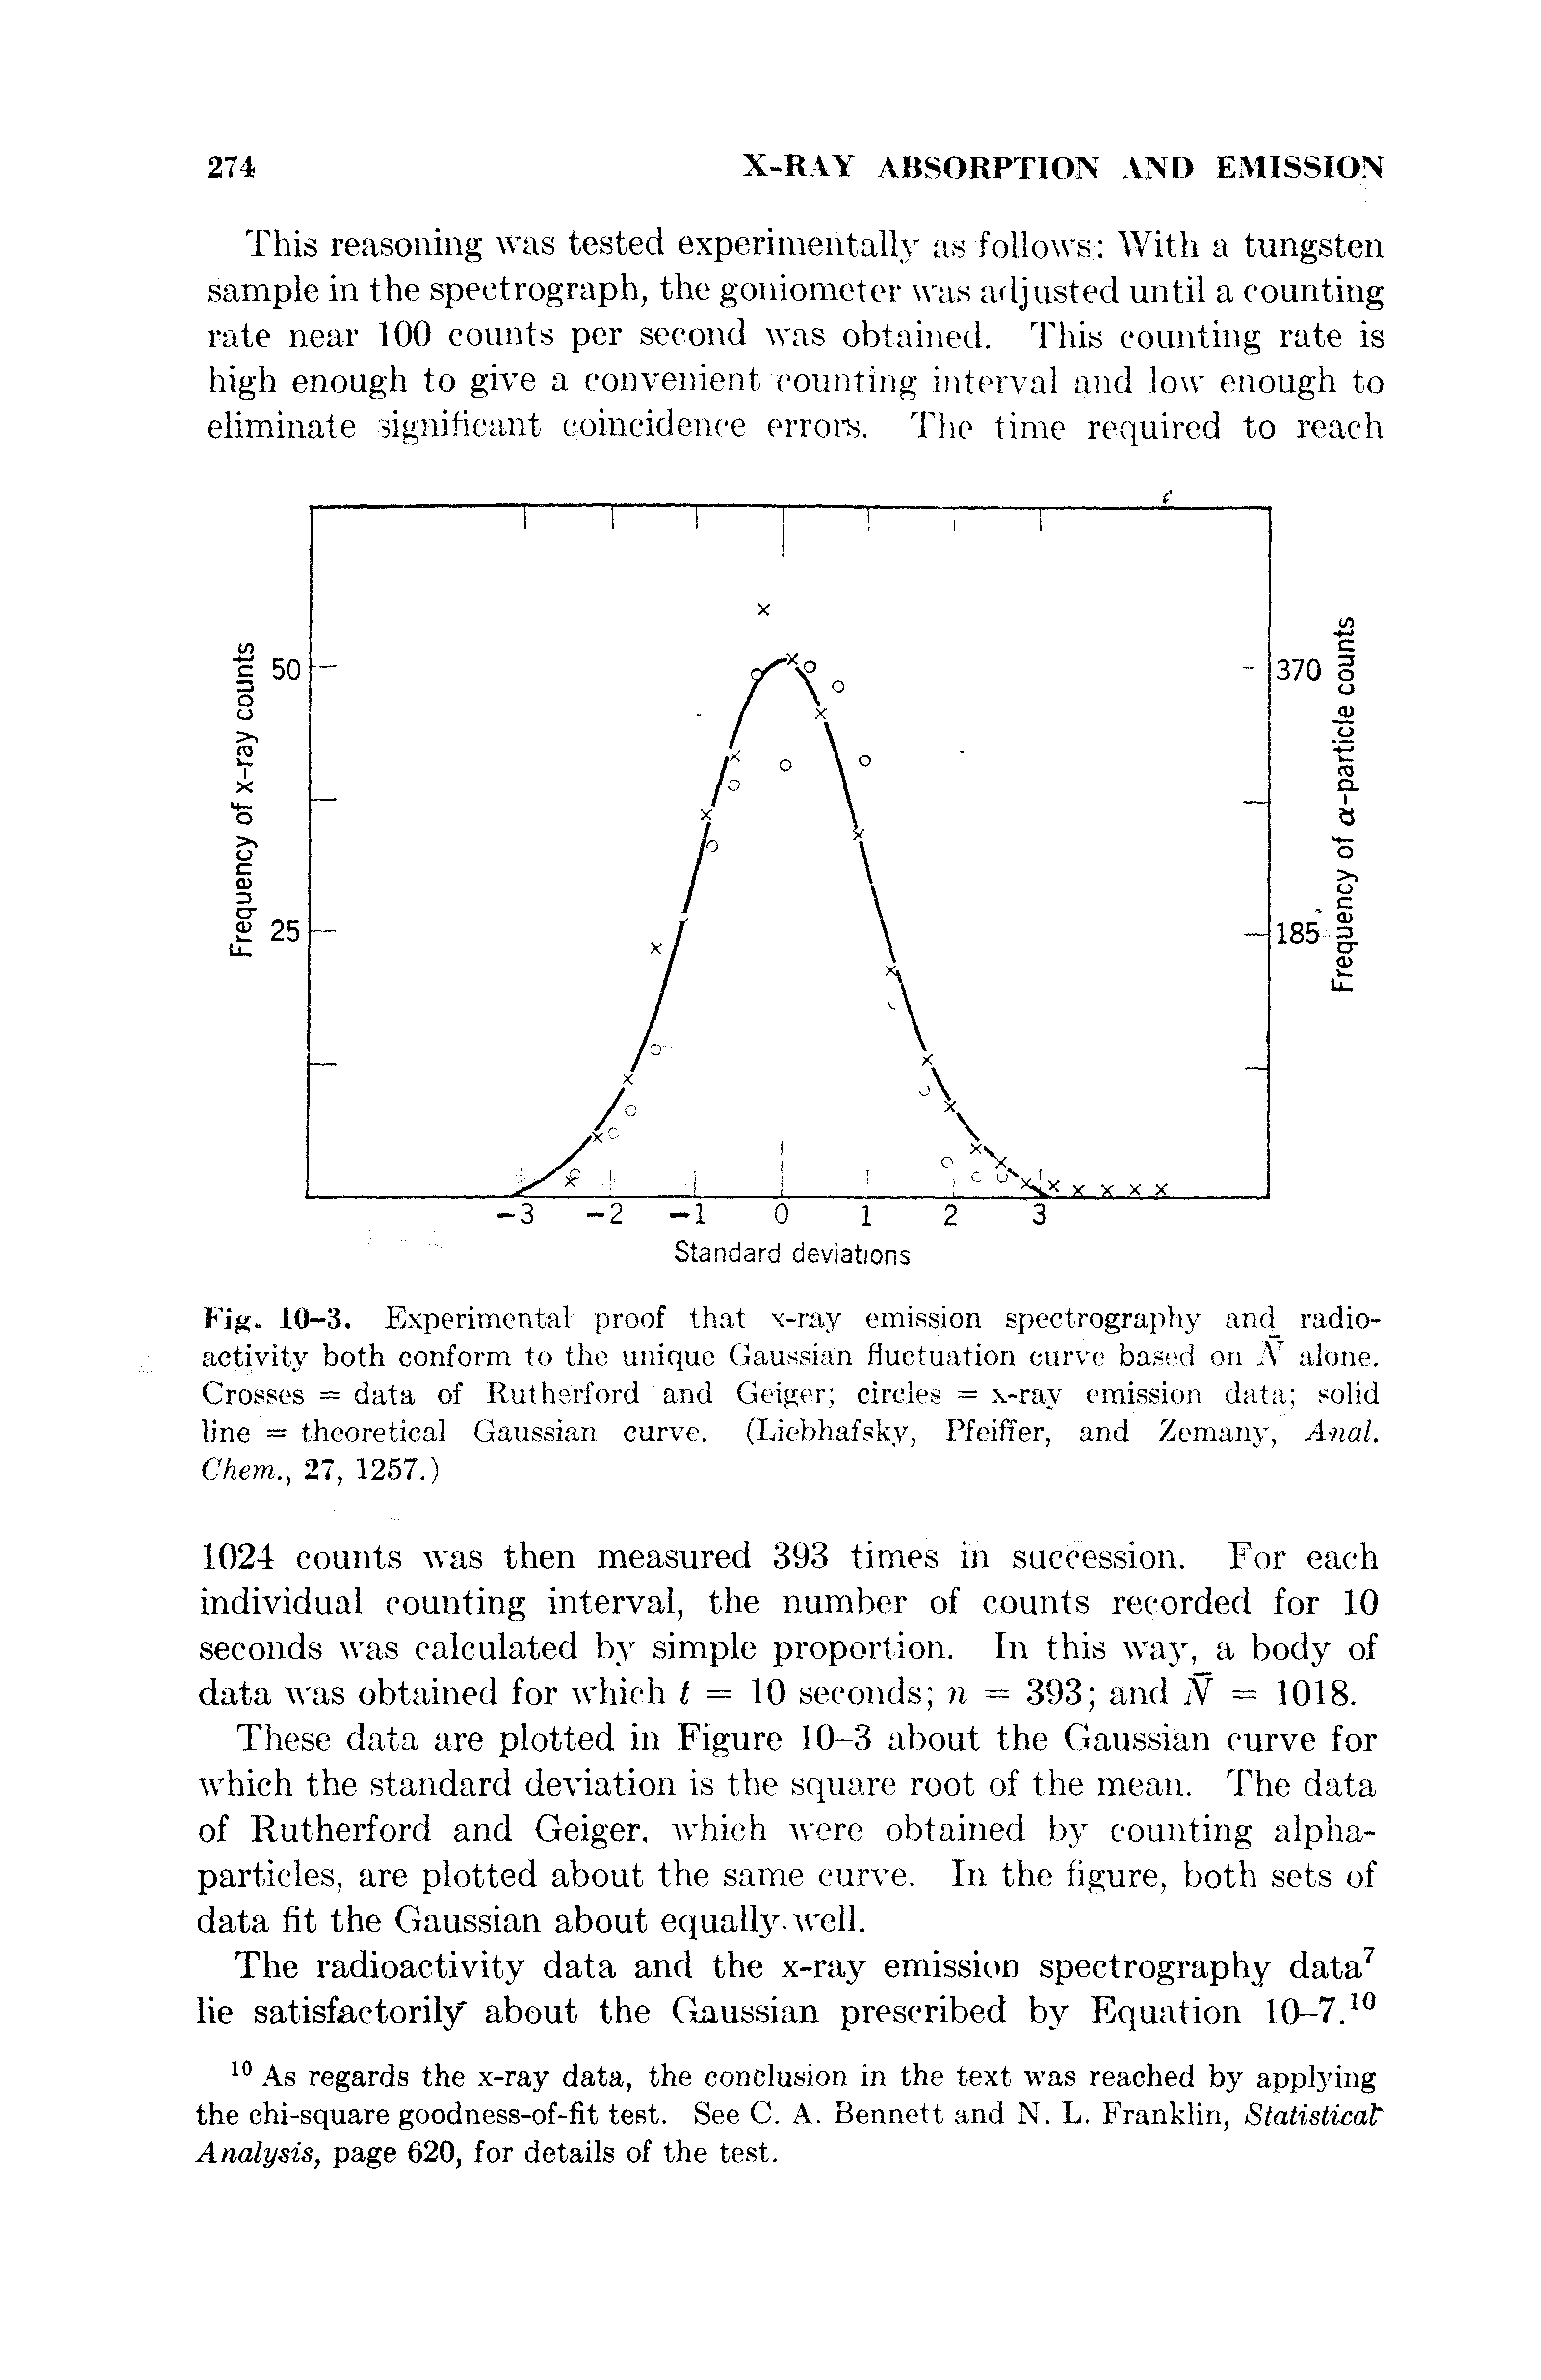 Fig. 10-3. Experimental proof that x-ray emission speetrography and radioactivity both conform to the unique Gaussian fluctuation curve based on N alone. Crosses = data of Rutherford and Geiger circles = x-ray emission data solid line = theoretical Gaussian curve. (Liebhafsky, Pfeiffer, and Zemany, Anal. Chem., 27, 1257.)...